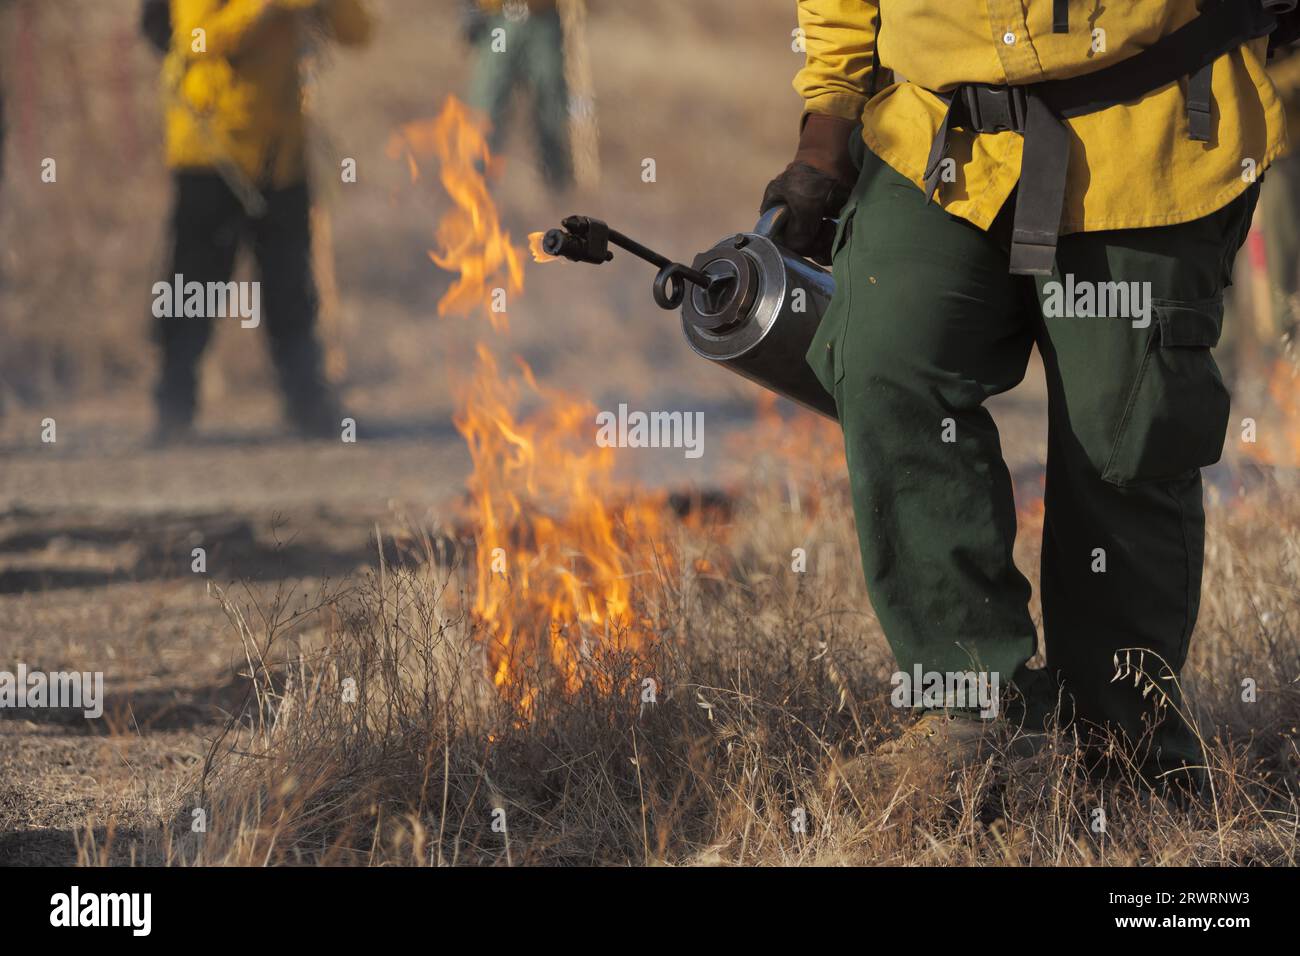 A firefighter lights grass on fire using a drip torch while others watch Stock Photo